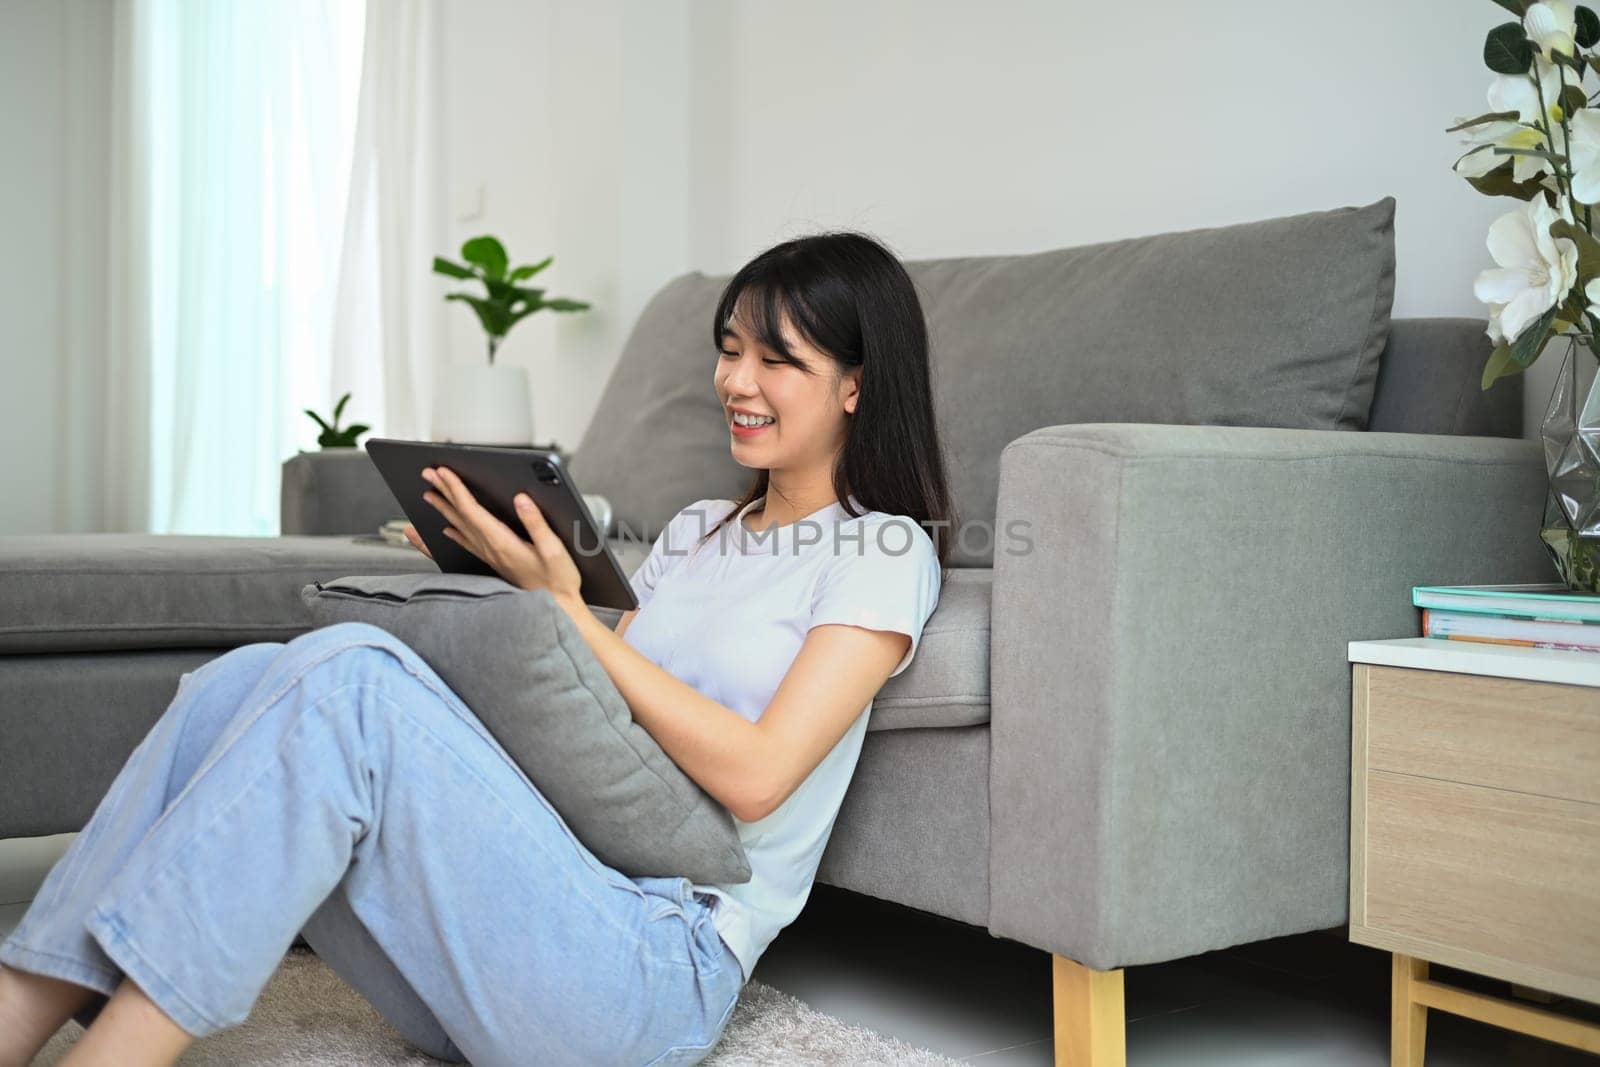 Happy young woman in casual clothing sitting on floor at home and using digital tablet.